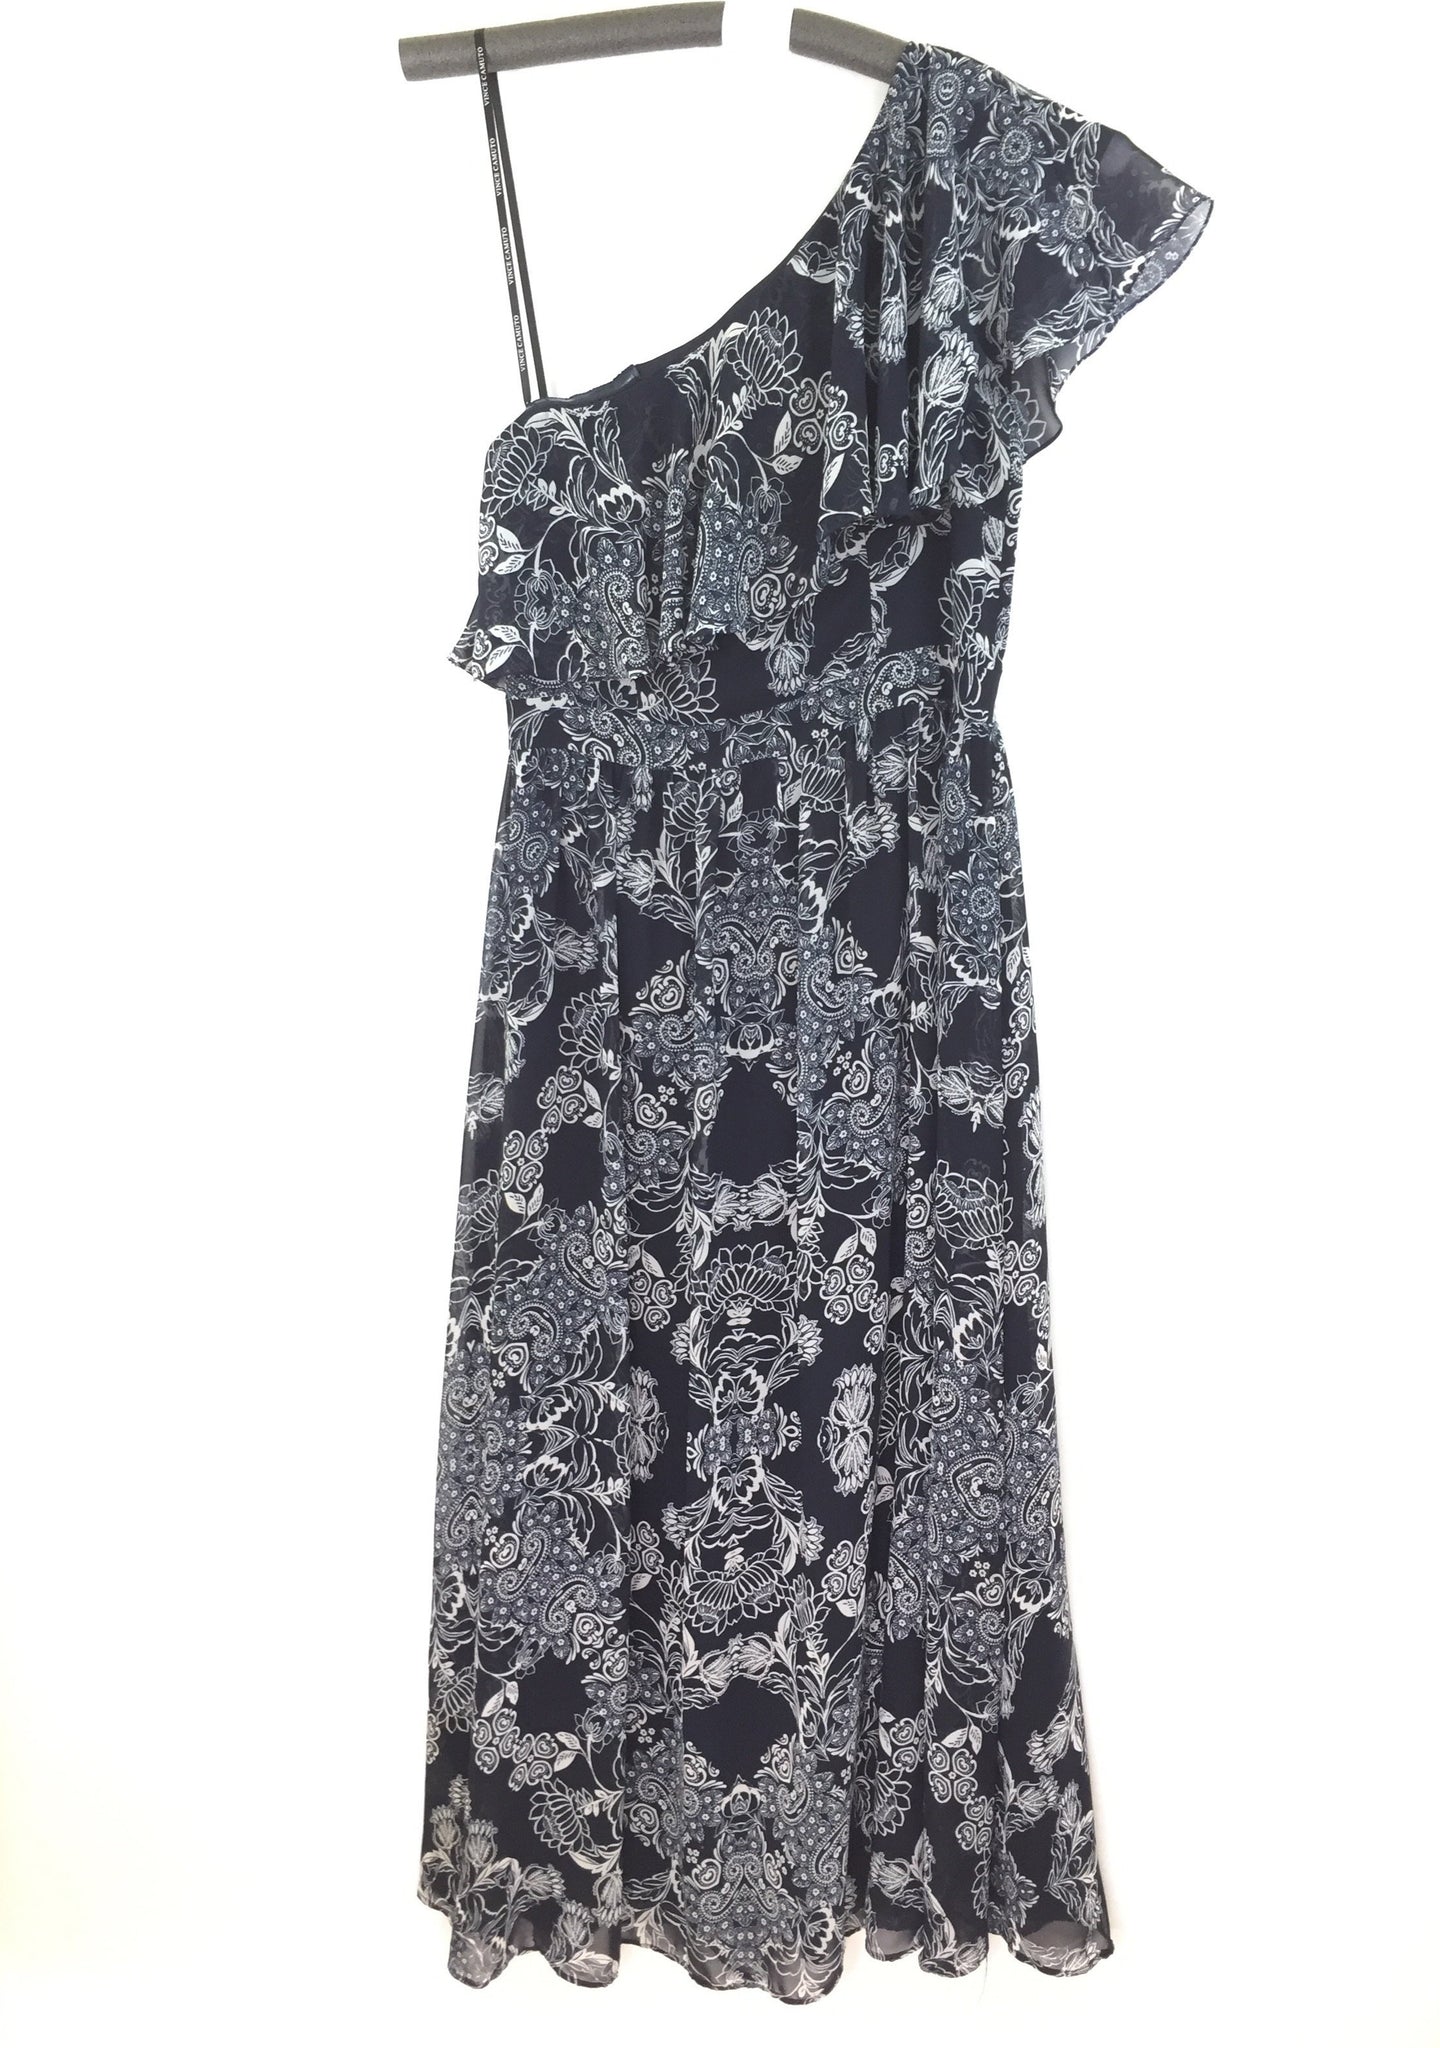 Vince Canute Womens Maxi Dress - Off One Shoulder - Navy Blue Floral - Size 12